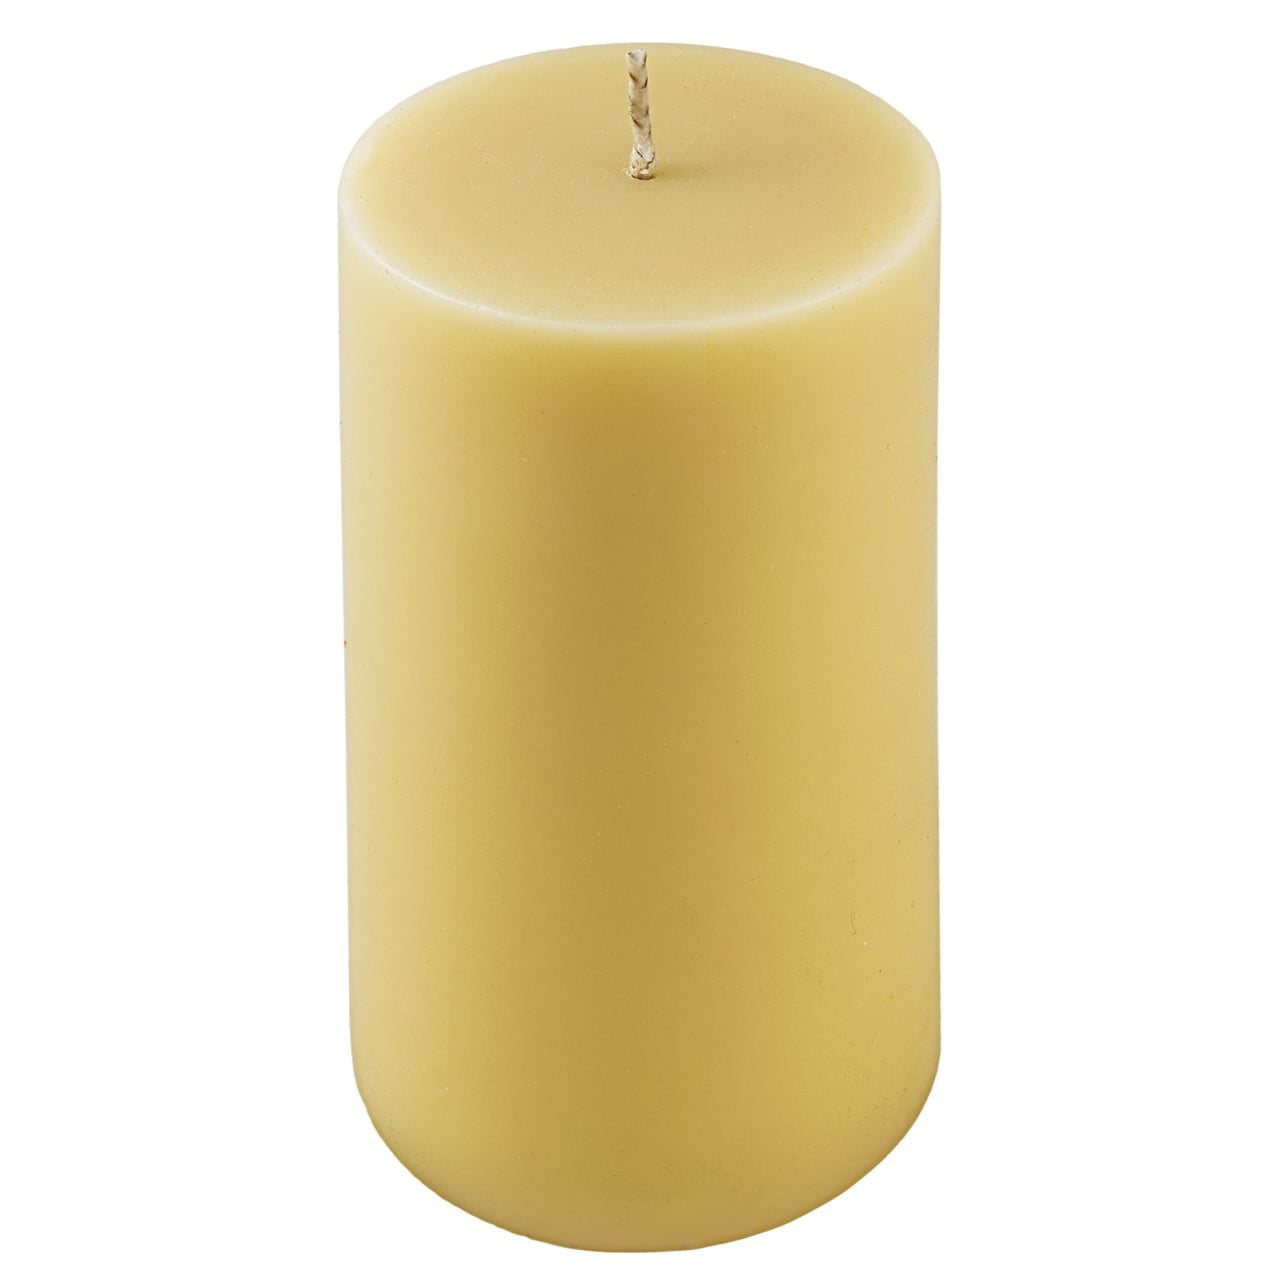 BMN Organic Beeswax Candle- Unscented